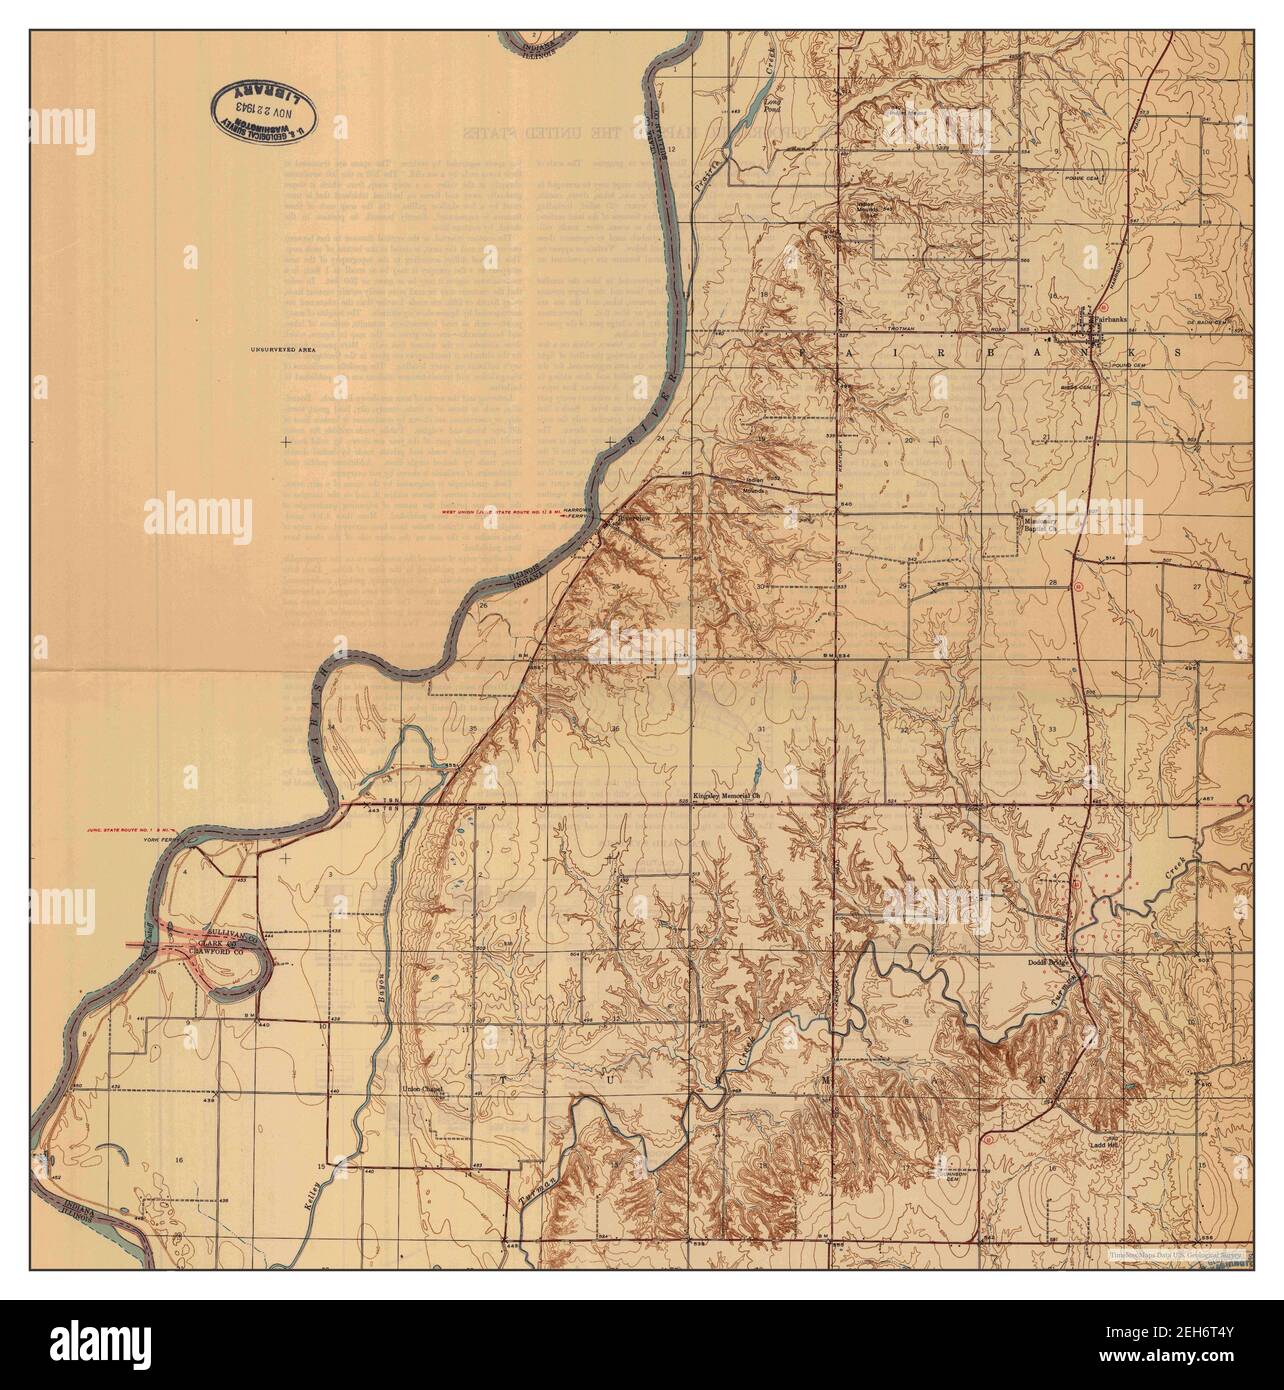 Fairbanks, Indiana, map 1942, 1:24000, United States of America by Timeless Maps, data U.S. Geological Survey Stock Photo